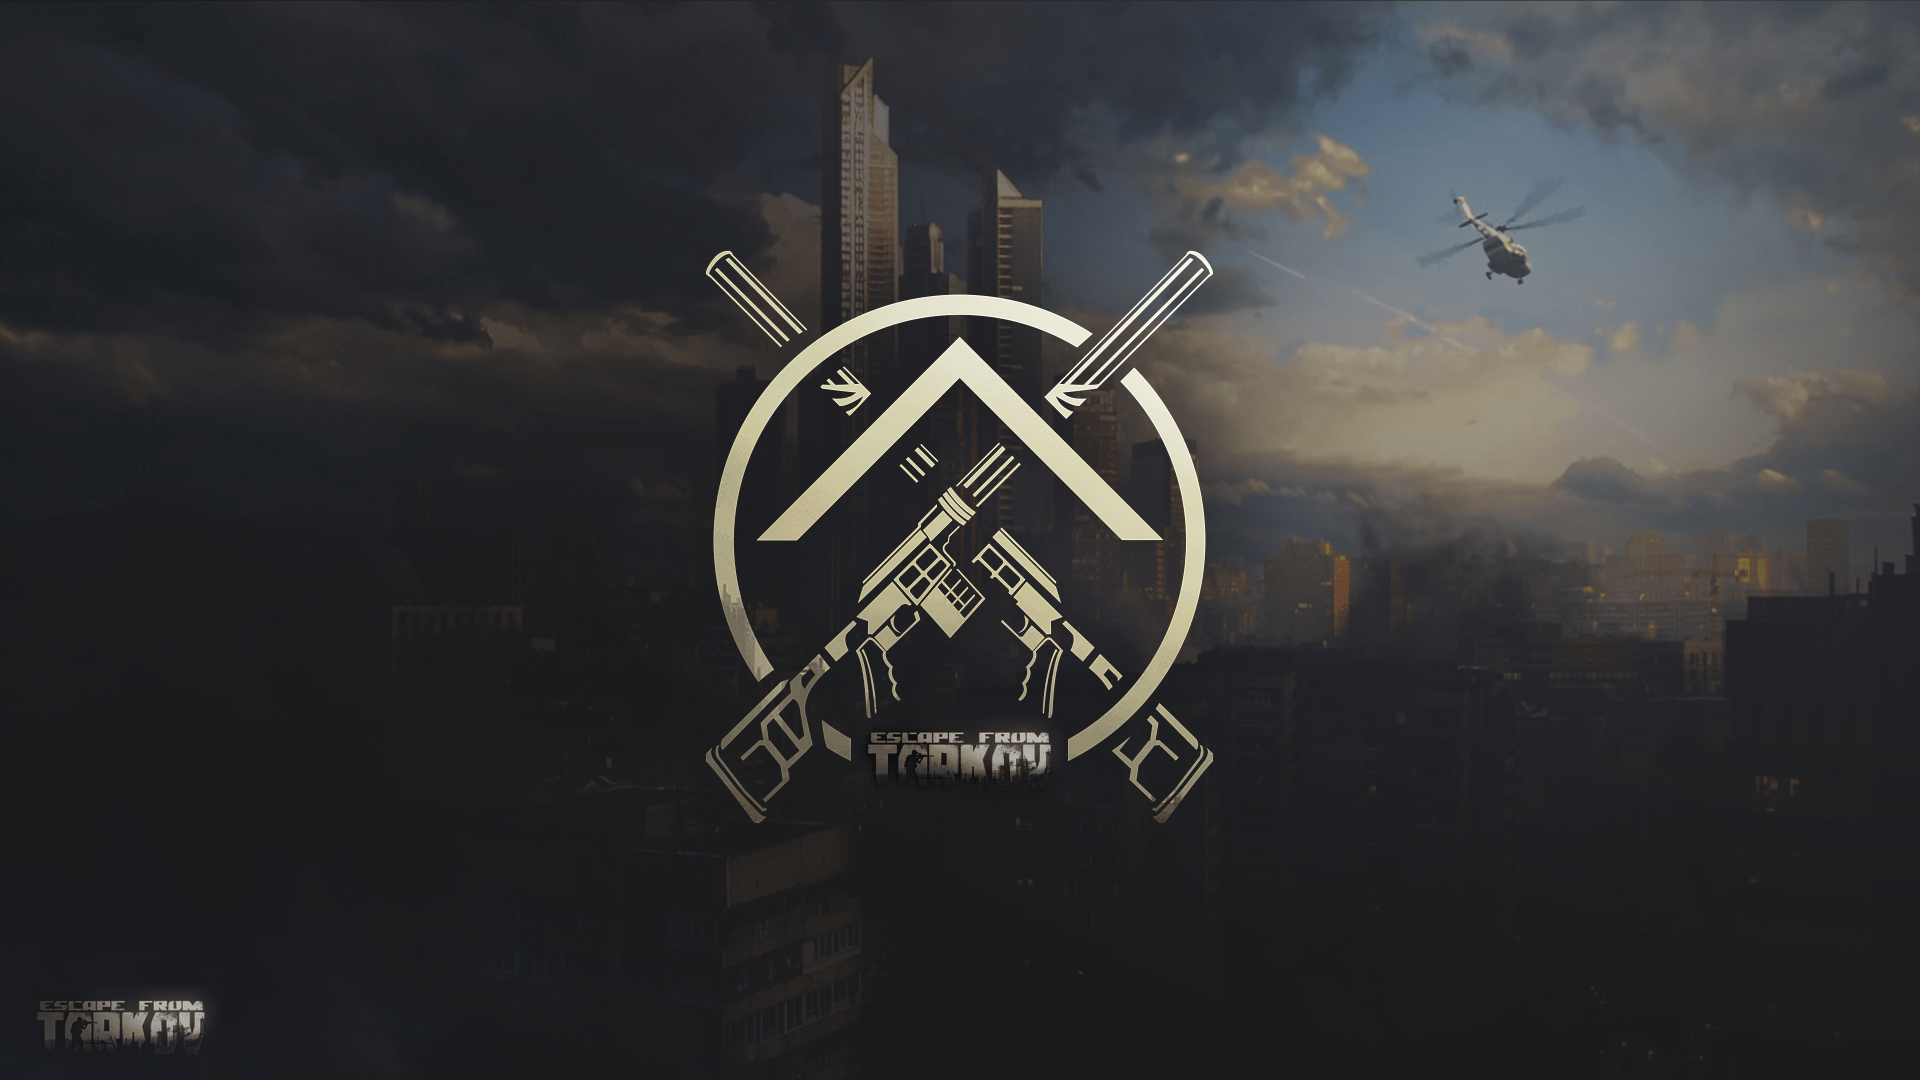 Escape From Tarkov Wallpapers - Top Free Escape From Tarkov Backgrounds